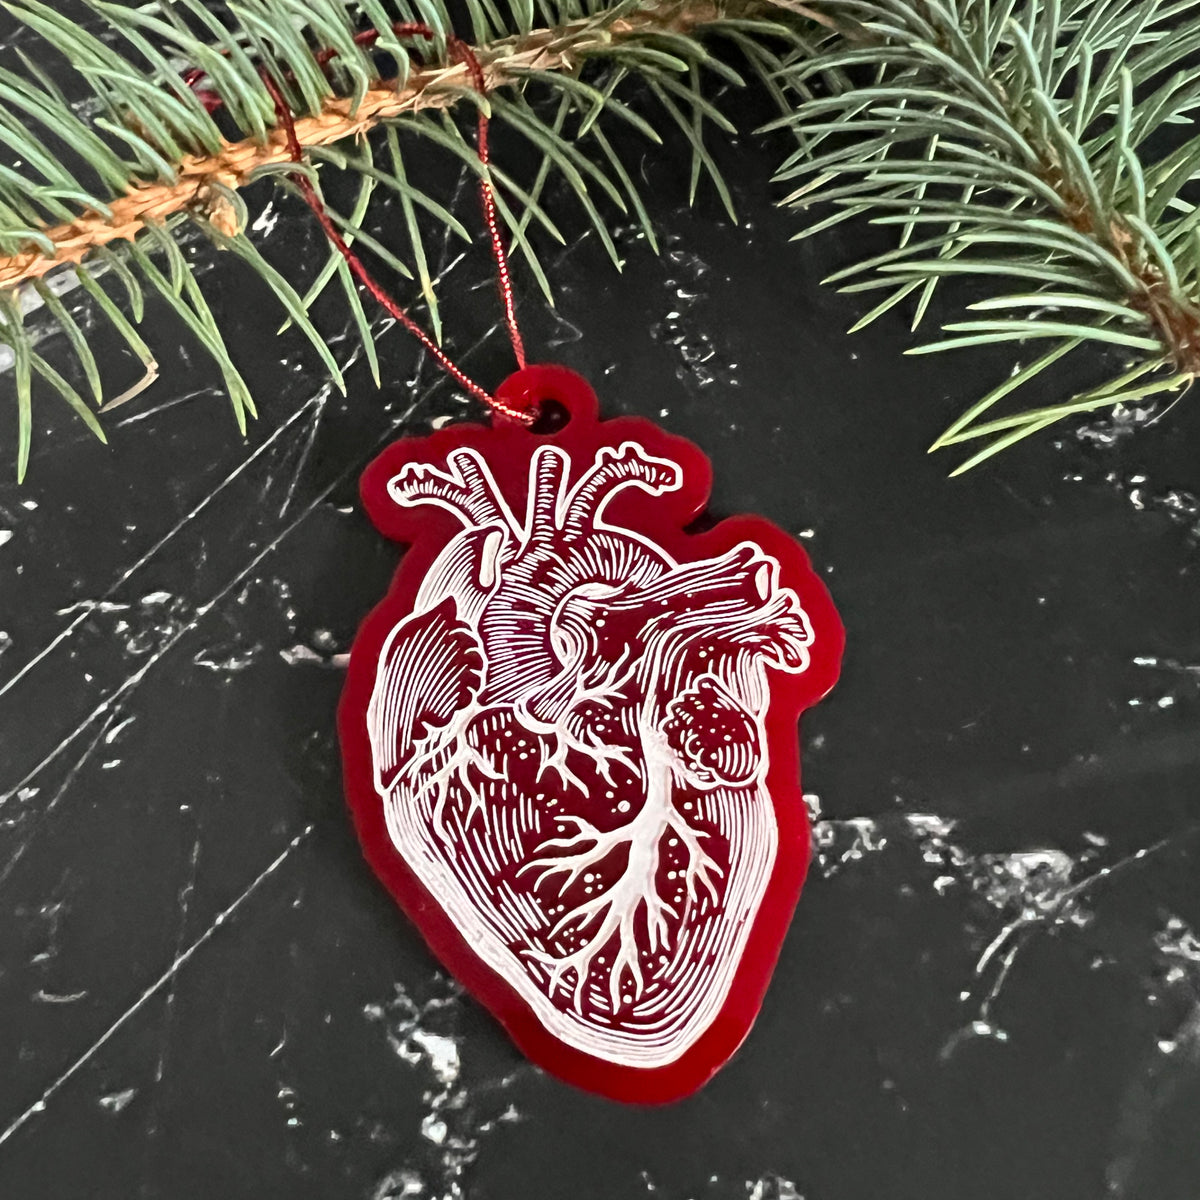 Anatomical Human Heart Christmas Ornament - Great Gift for Doctors, Nurses, Medical Techs, Med Students